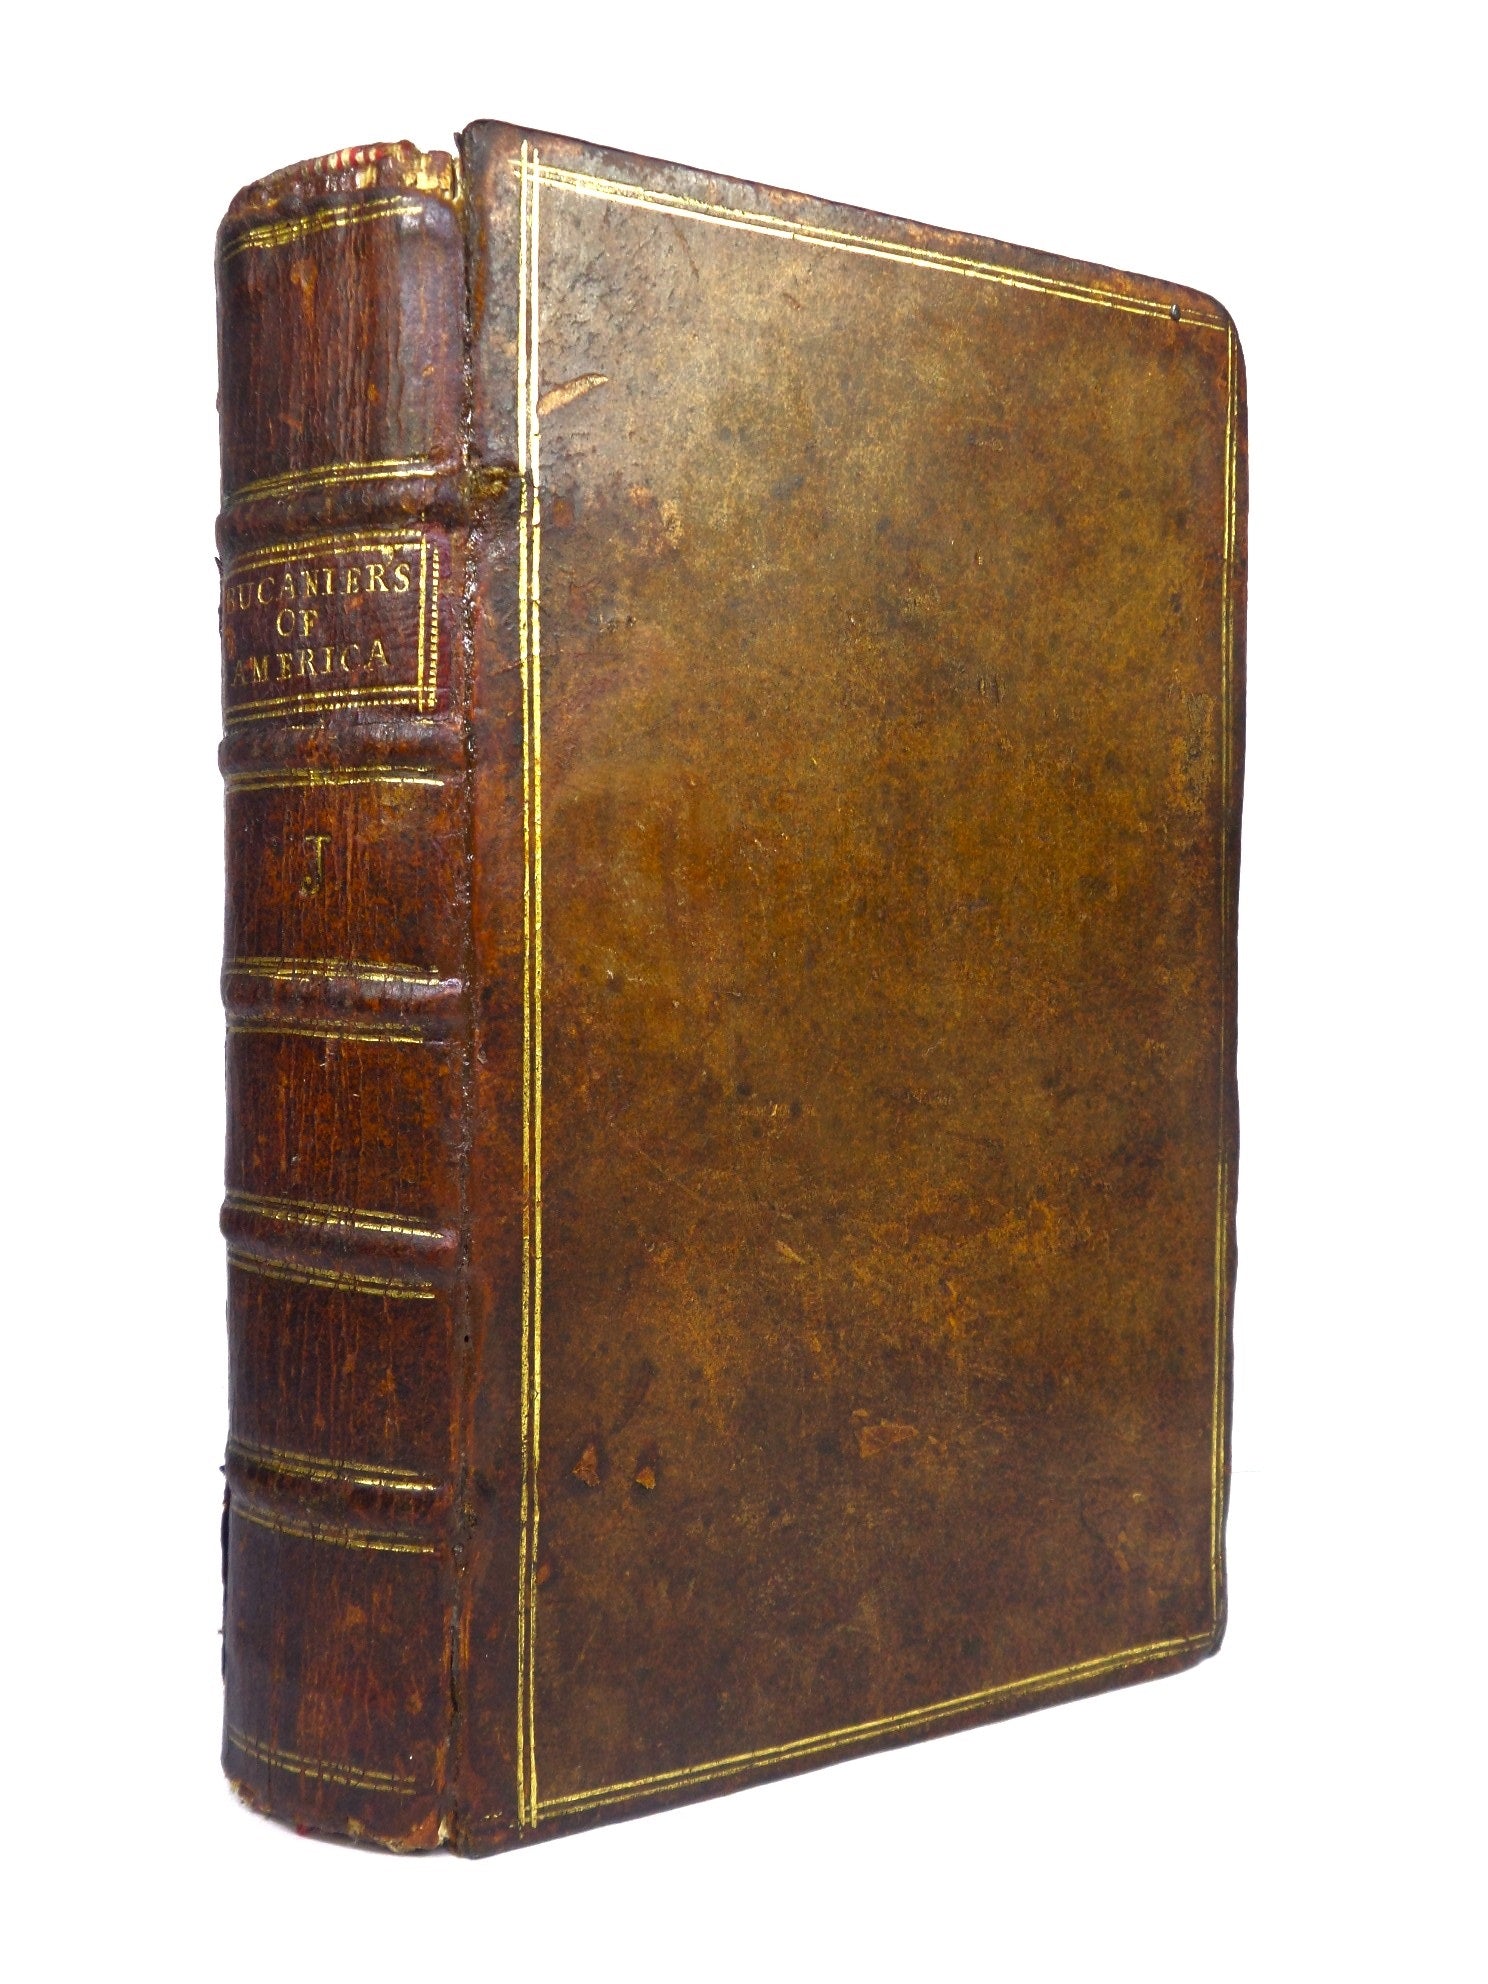 THE HISTORY OF THE BUCANIERS OF AMERICA 1741 ALEXANDRE EXQUEMELIN FOURTH EDITION, VOLUME ONE ONLY